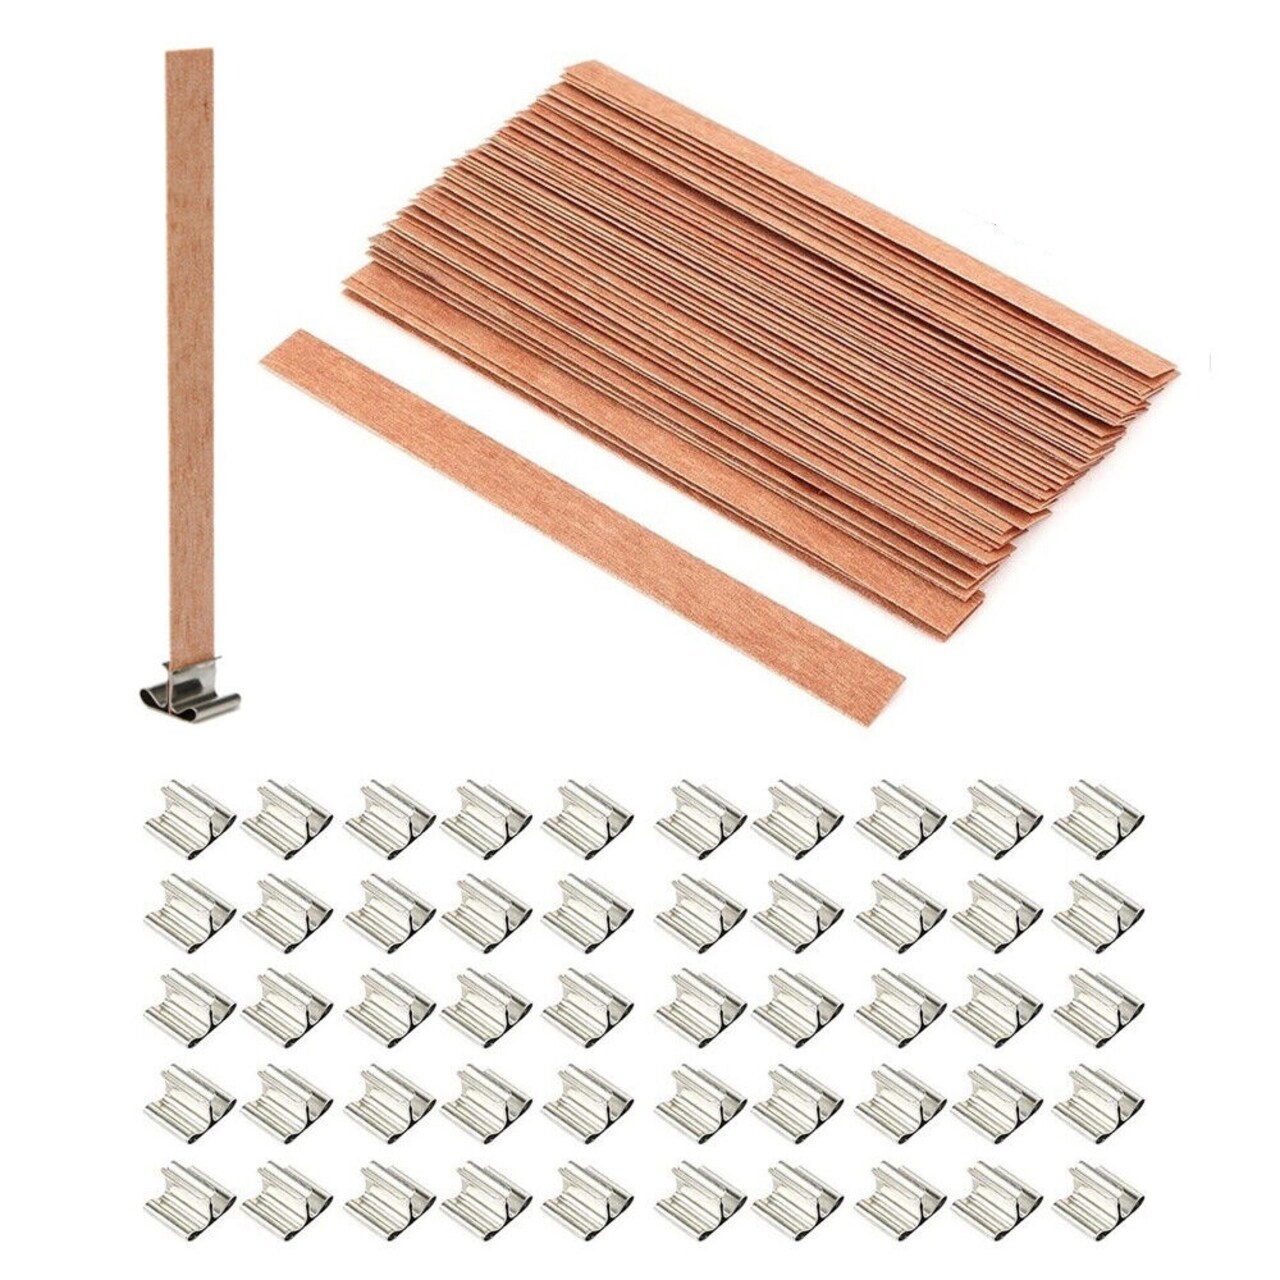 100pcs Wood Wicks For Making Candles Kit - 100 Iron Stands For